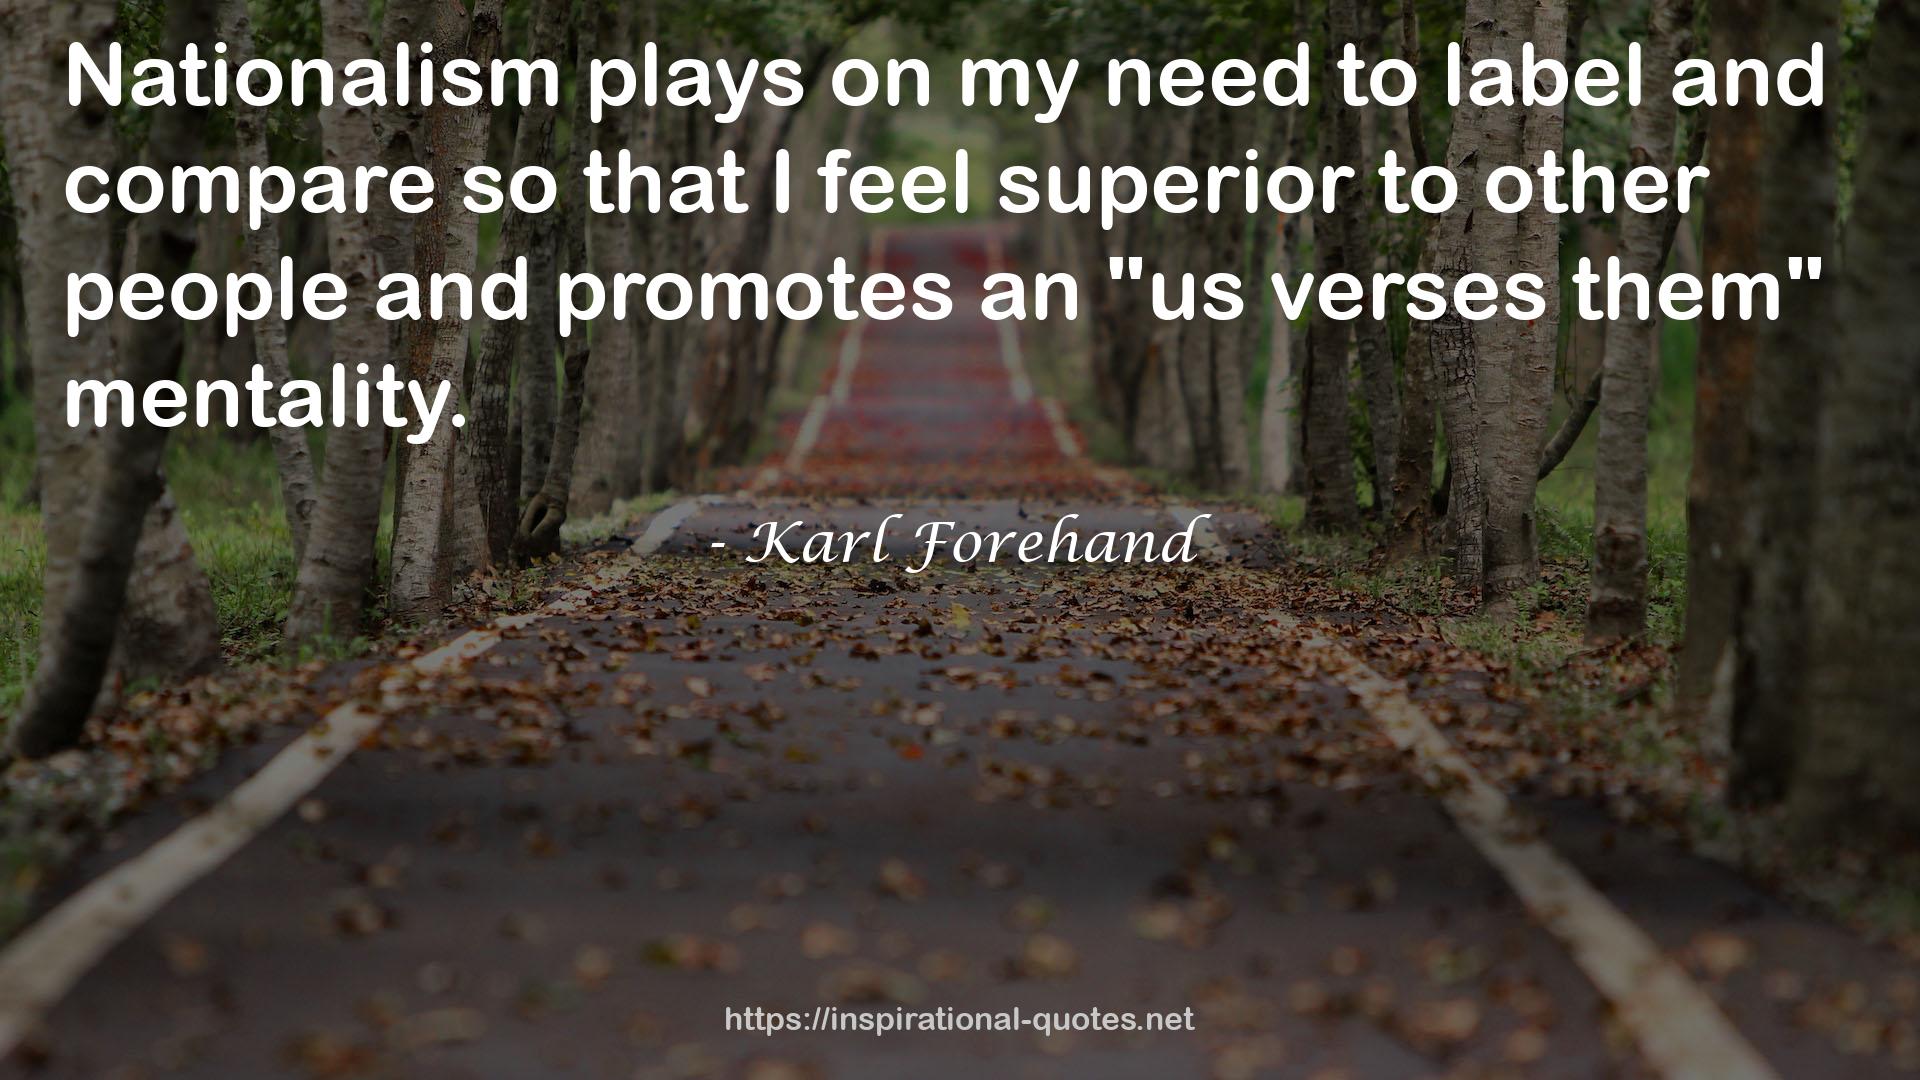 Karl Forehand QUOTES